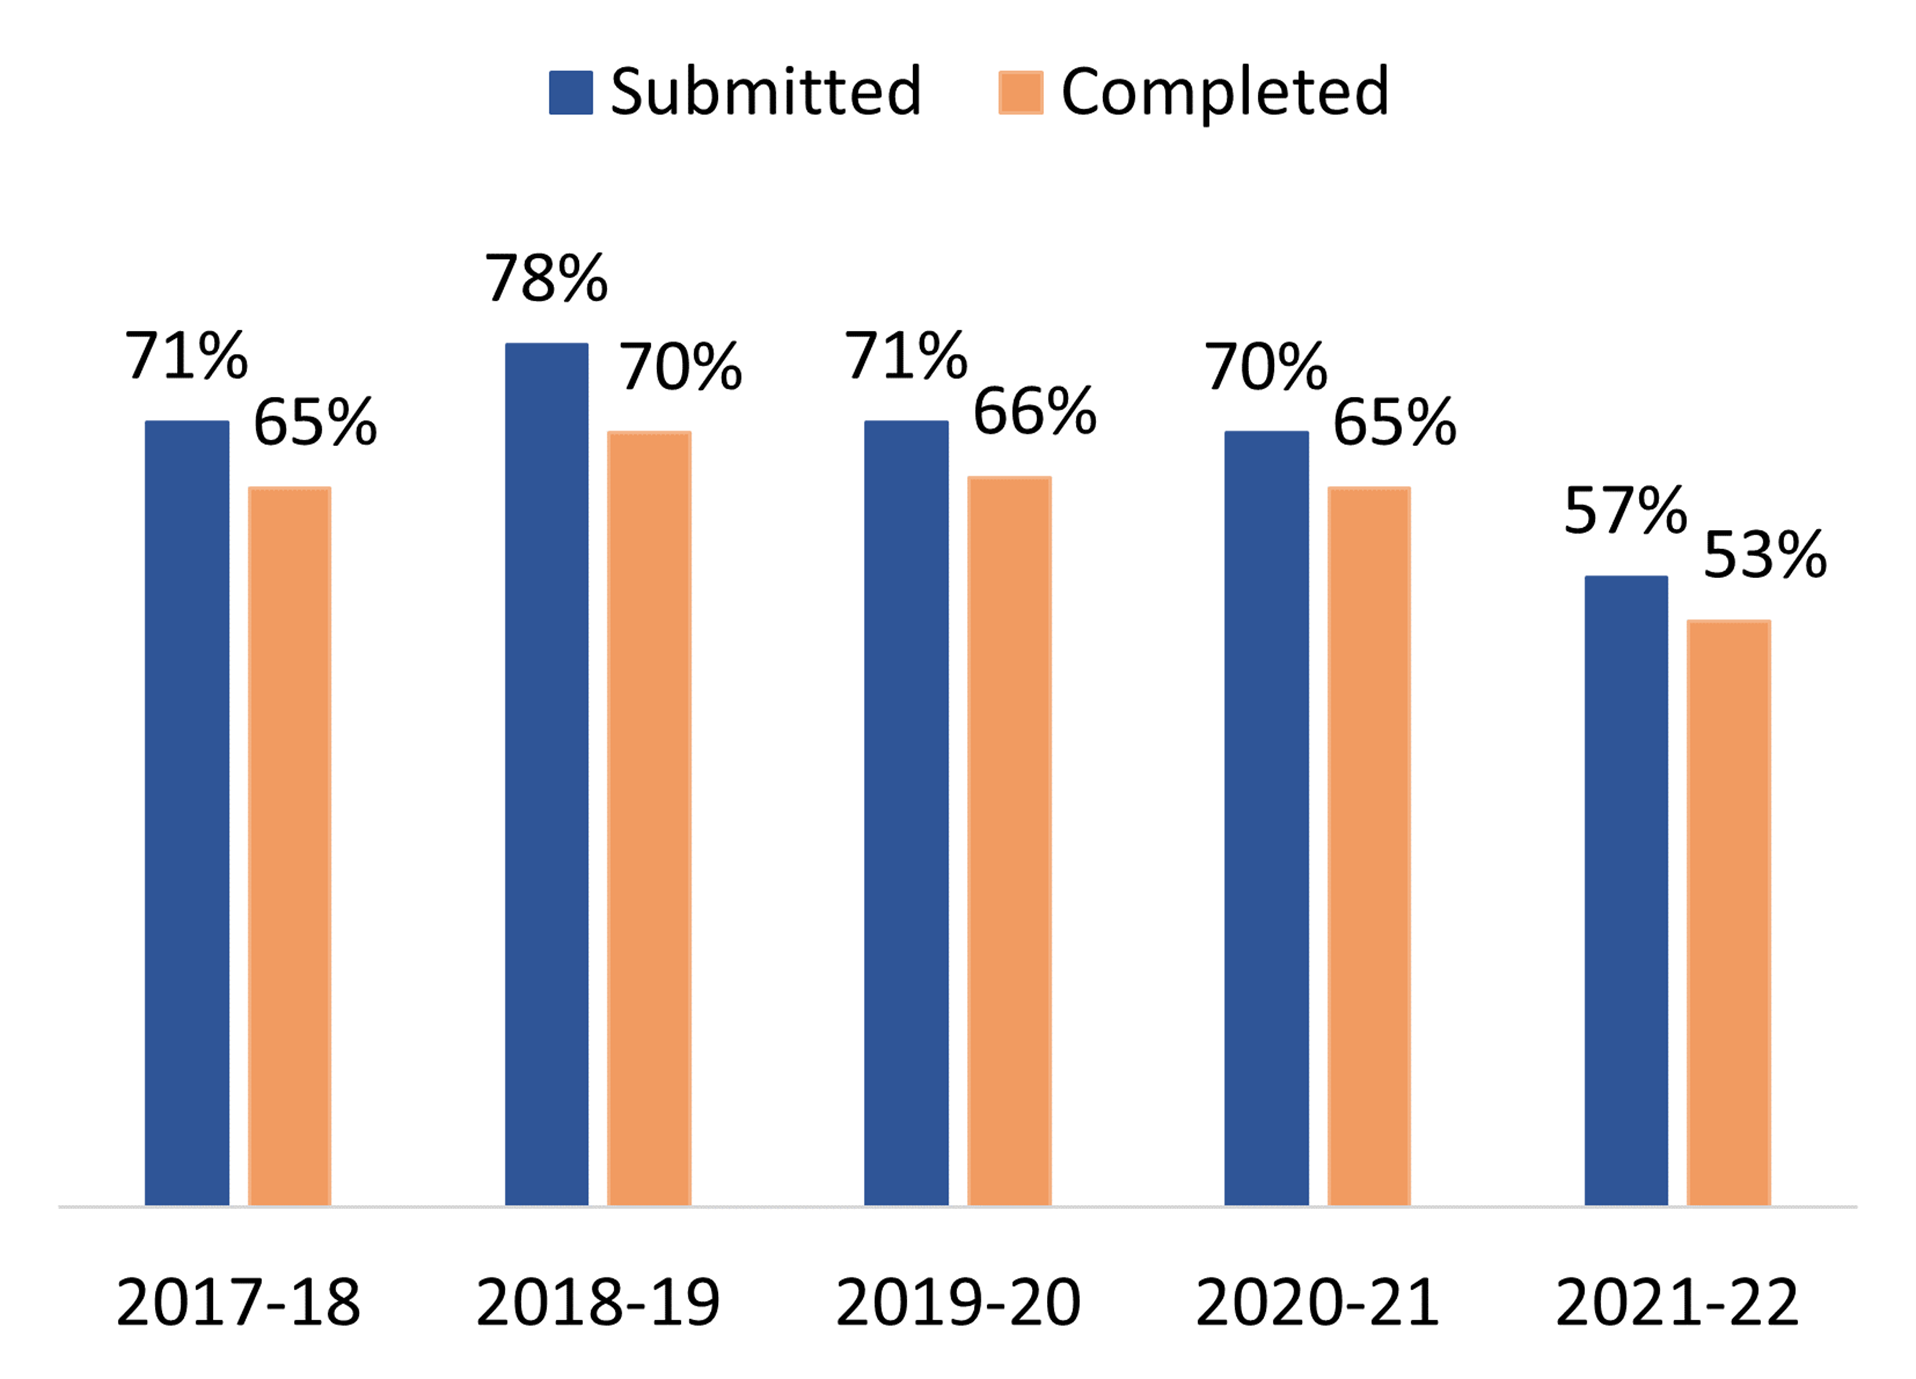 Five bar charts, each with values for FAFSA submission and FAFSA completion rates between the 2017-18 and 2021-22 school years. The 2017-18 chart's percentages were 71% for submission and 65% for completion. The 2018-19 chart's percentages were 78% for submission and 70% for completion. The 2019-20 chart's percentages were 71% for submission and 66% for completion. The 2020-21 chart's percentages were 70% for submission and 65% for completion. The 2021-22 chart's percentages were 57% for submission and 53% for completion.